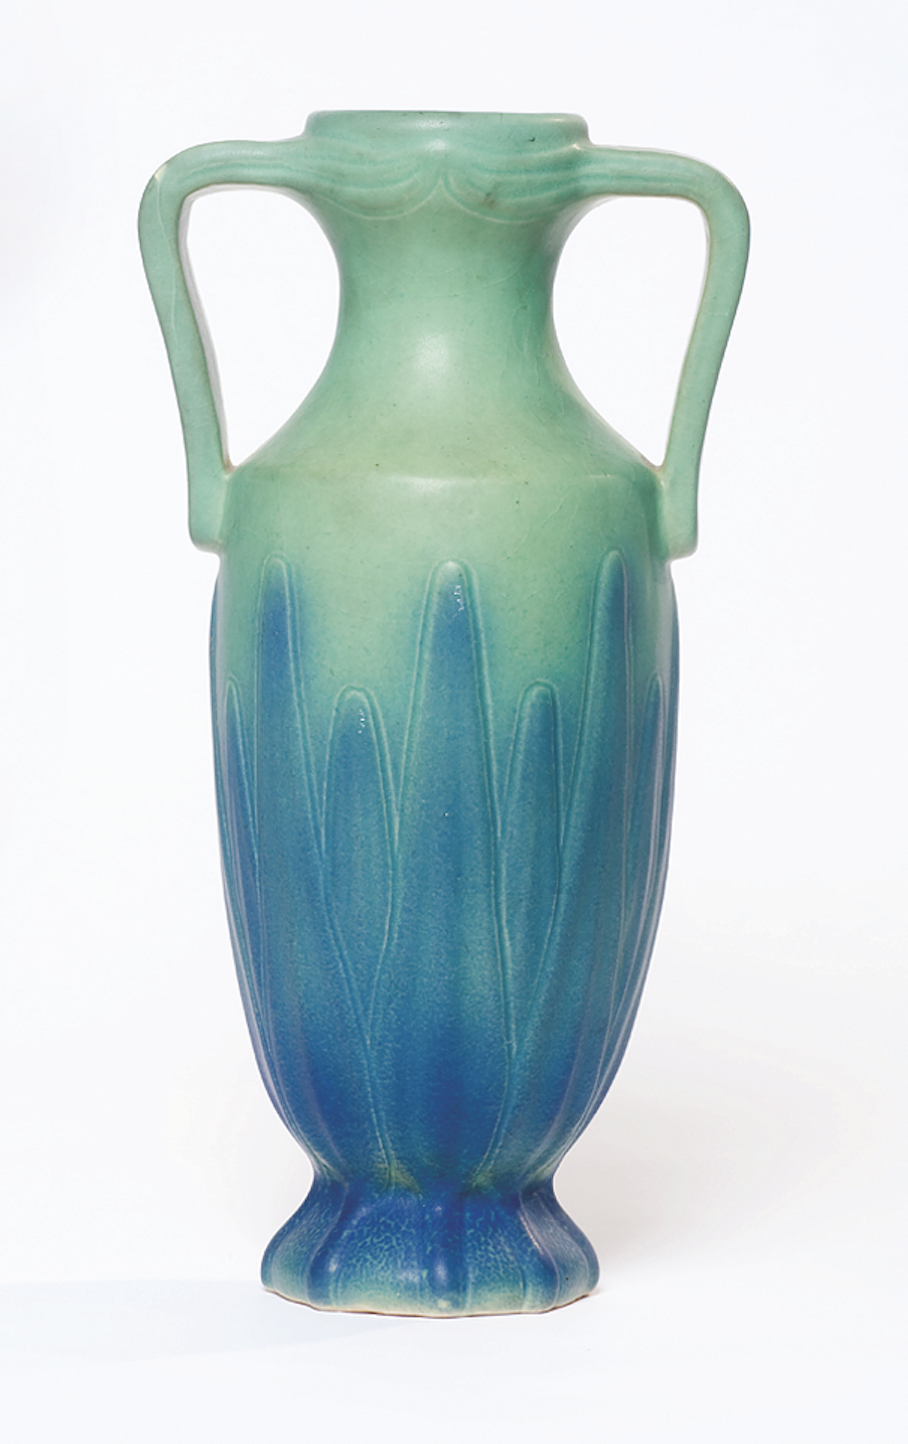 Tall vase with double handles in shades of green and blue.